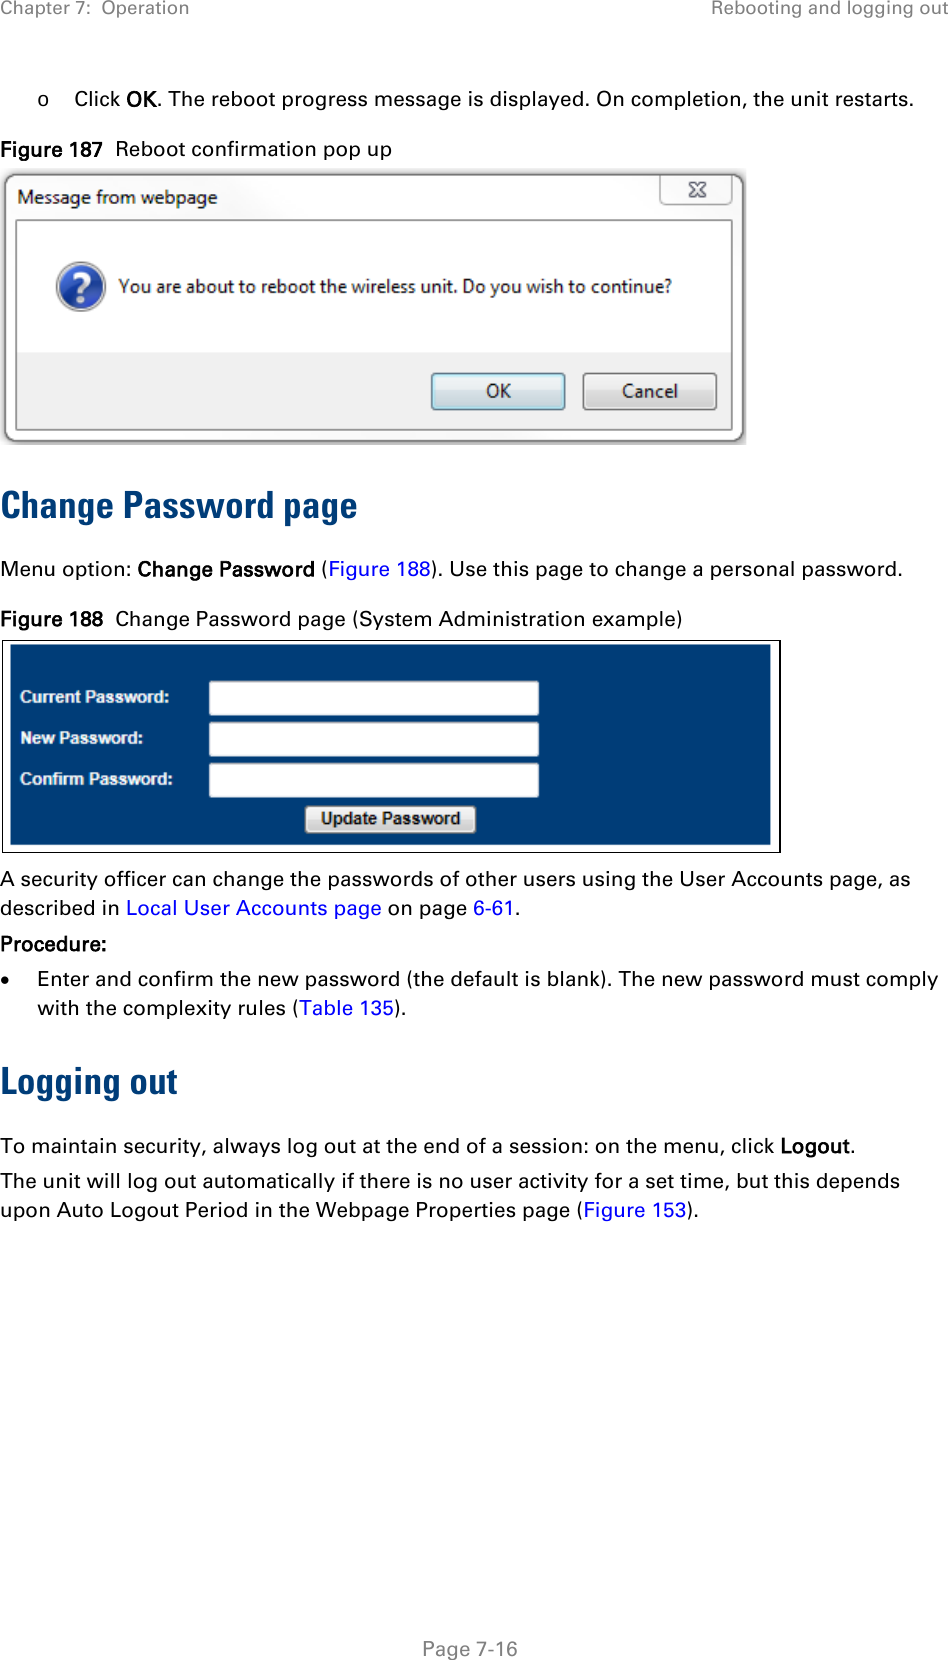 Chapter 7:  Operation Rebooting and logging out  o Click OK. The reboot progress message is displayed. On completion, the unit restarts. Figure 187  Reboot confirmation pop up  Change Password page Menu option: Change Password (Figure 188). Use this page to change a personal password. Figure 188  Change Password page (System Administration example)  A security officer can change the passwords of other users using the User Accounts page, as described in Local User Accounts page on page 6-61. Procedure: • Enter and confirm the new password (the default is blank). The new password must comply with the complexity rules (Table 135). Logging out  To maintain security, always log out at the end of a session: on the menu, click Logout.  The unit will log out automatically if there is no user activity for a set time, but this depends upon Auto Logout Period in the Webpage Properties page (Figure 153).   Page 7-16 